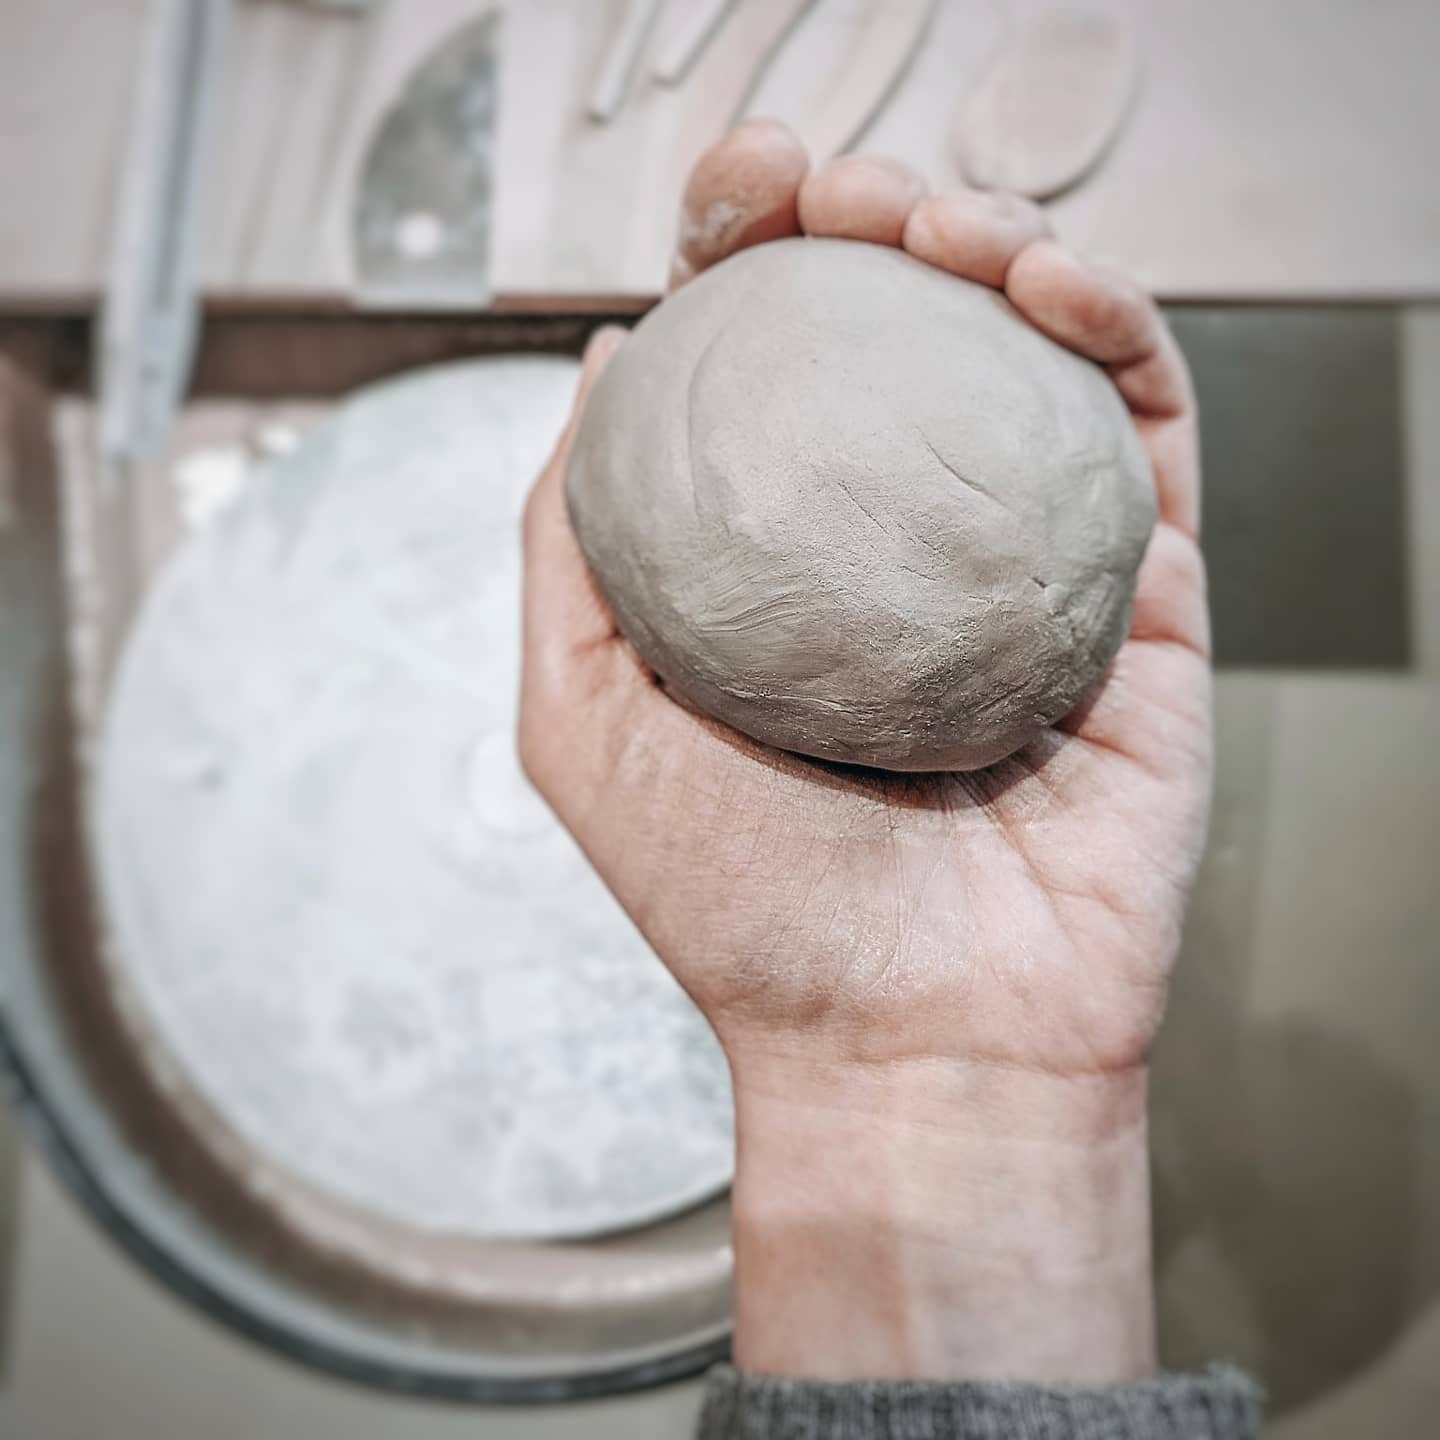 So much potential in this little ball of mud! 
-
#clay #potterswheel #throwing #studiolife #pottery #ceramics #maker #makersgonnamake #handmade #stoneware #designermaker #craft #simpleliving